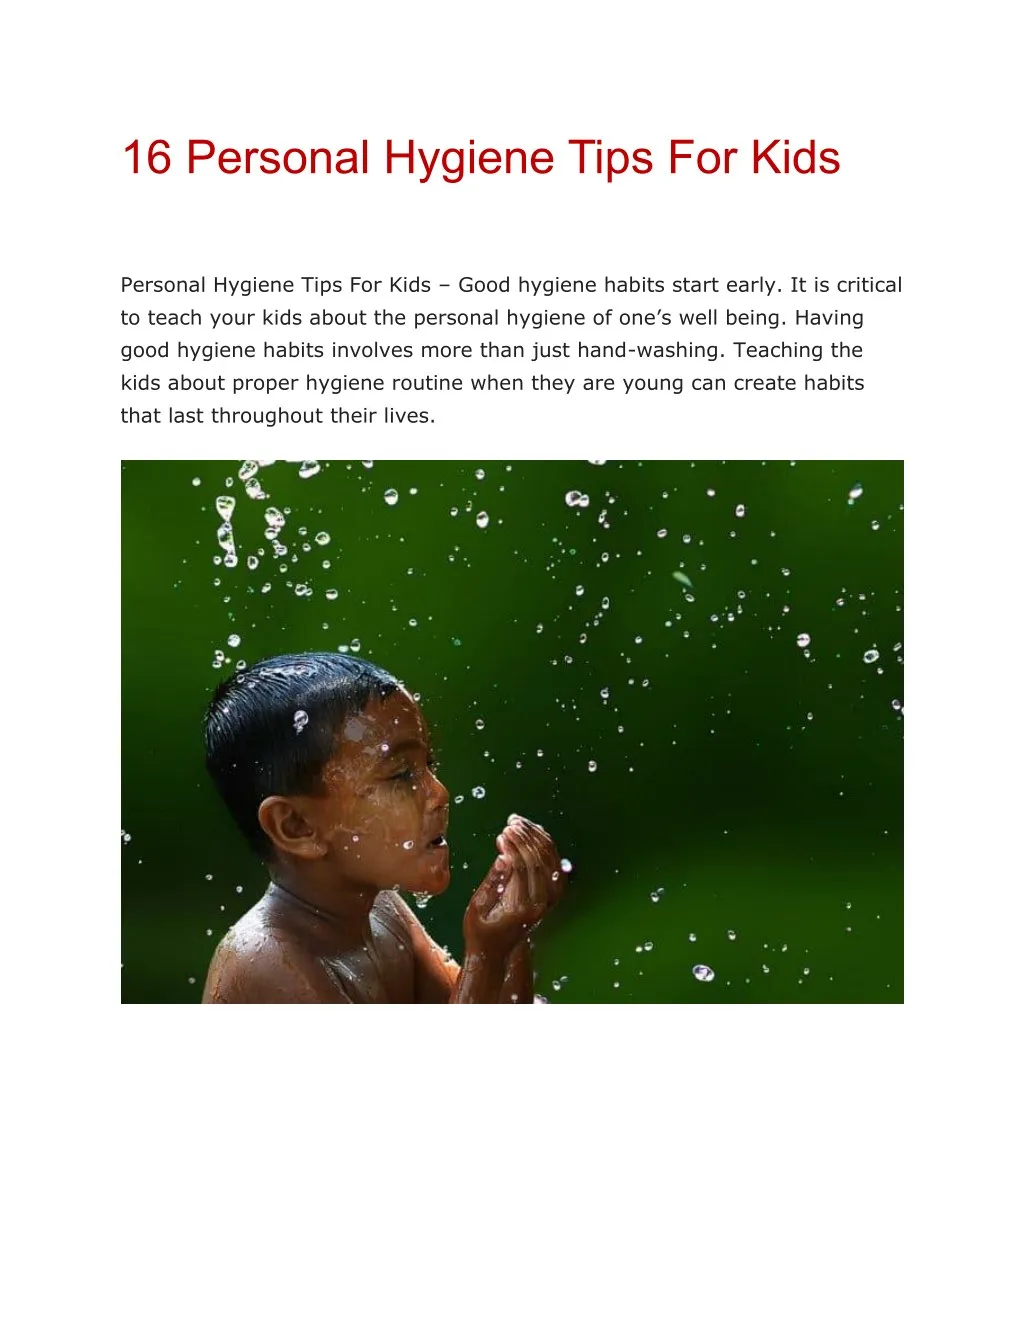 16 personal hygiene tips for kids